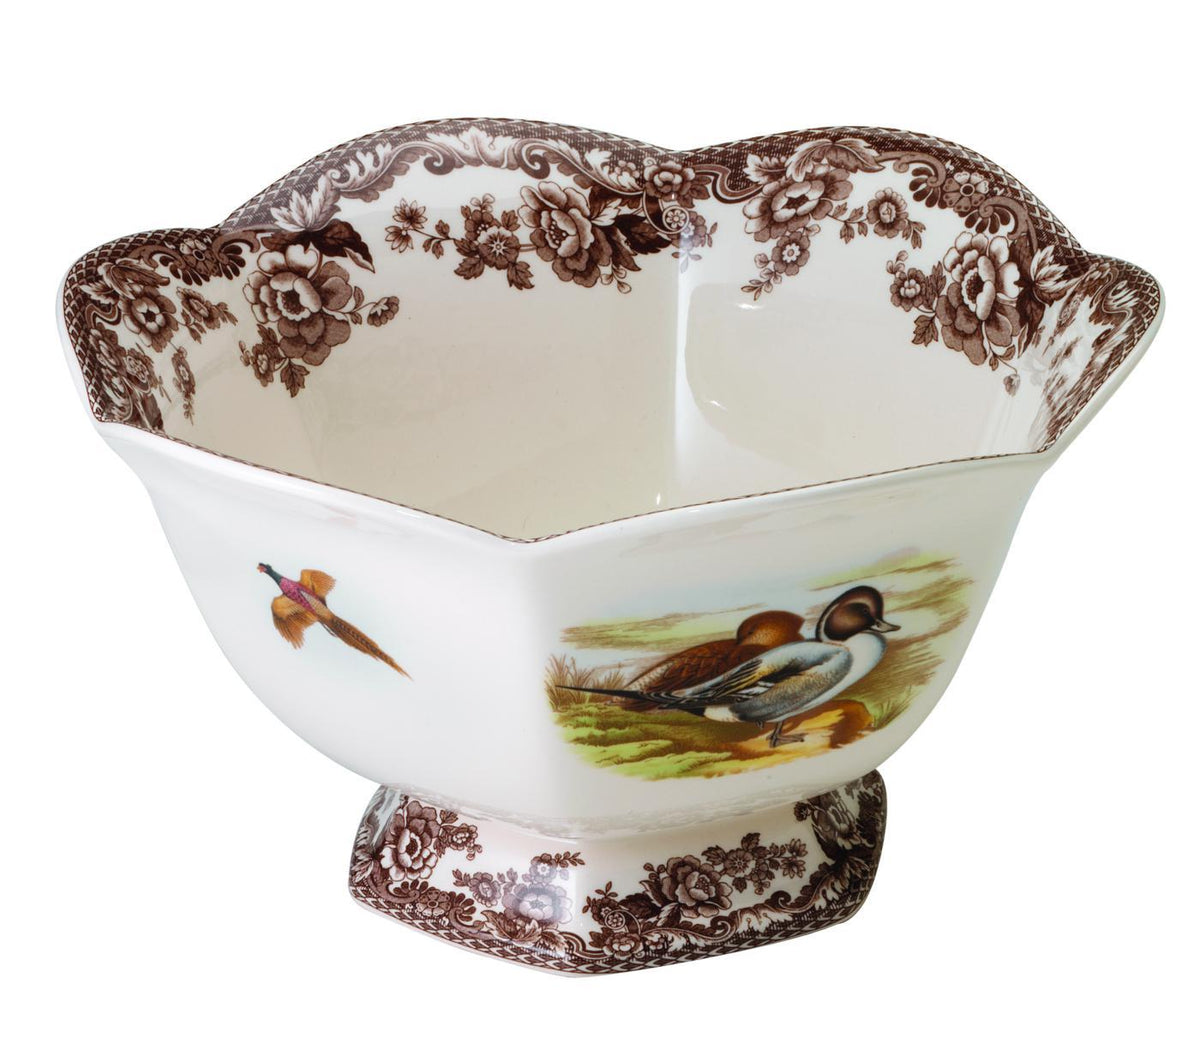 Woodland Hexagonal Footed Bowl 8.5 Inch (Lapwing/Pintail)